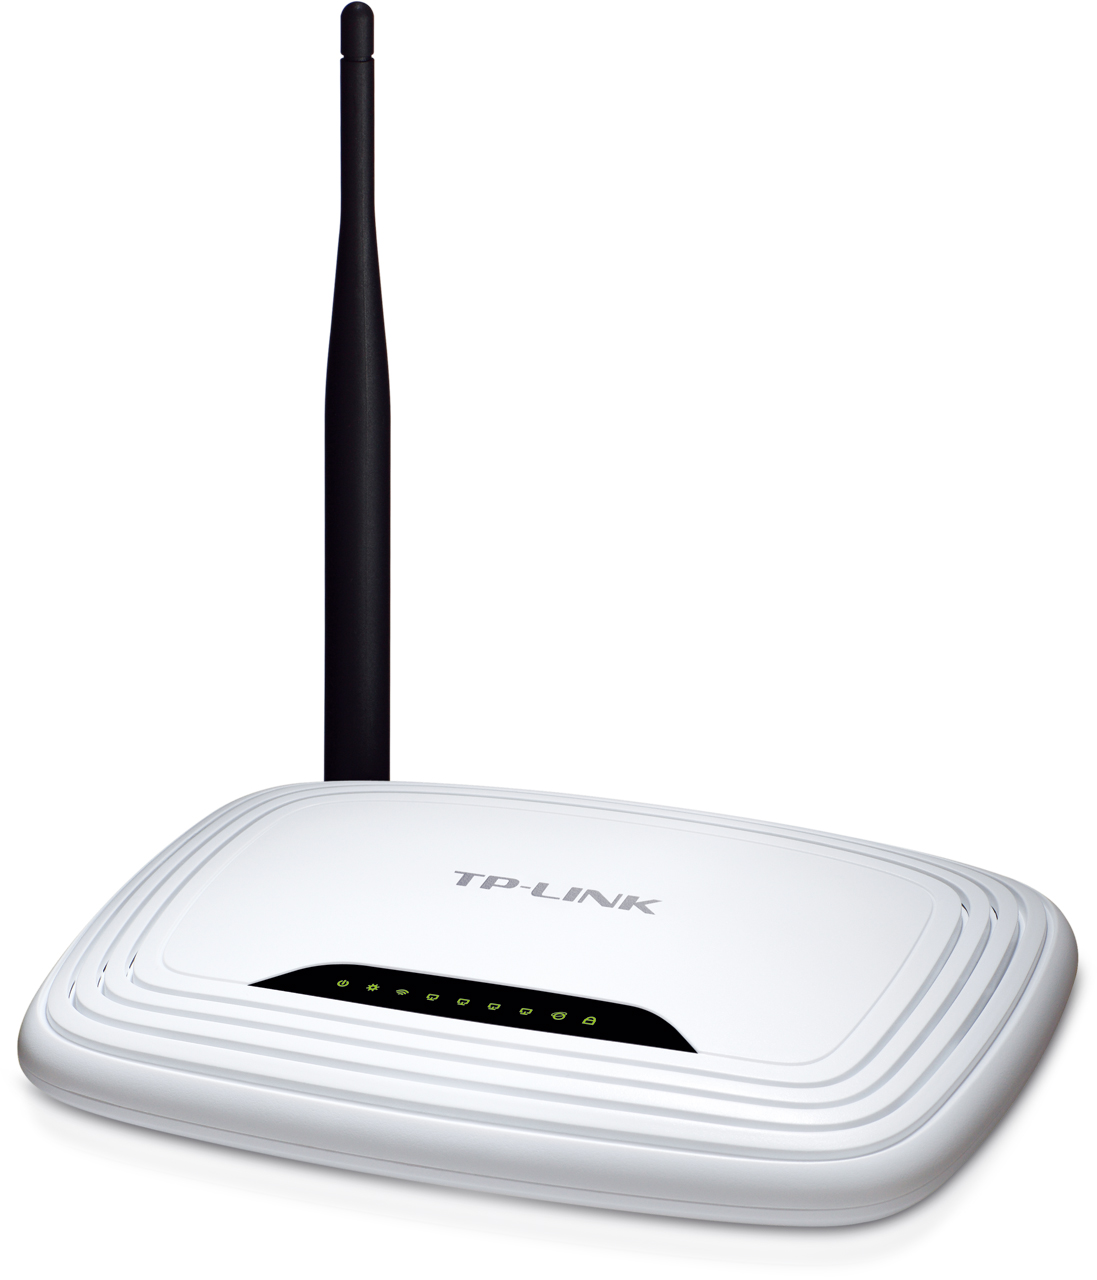 TP LINK-WR741ND .....150mb Wireless N Router 2.4 GHz large image 0